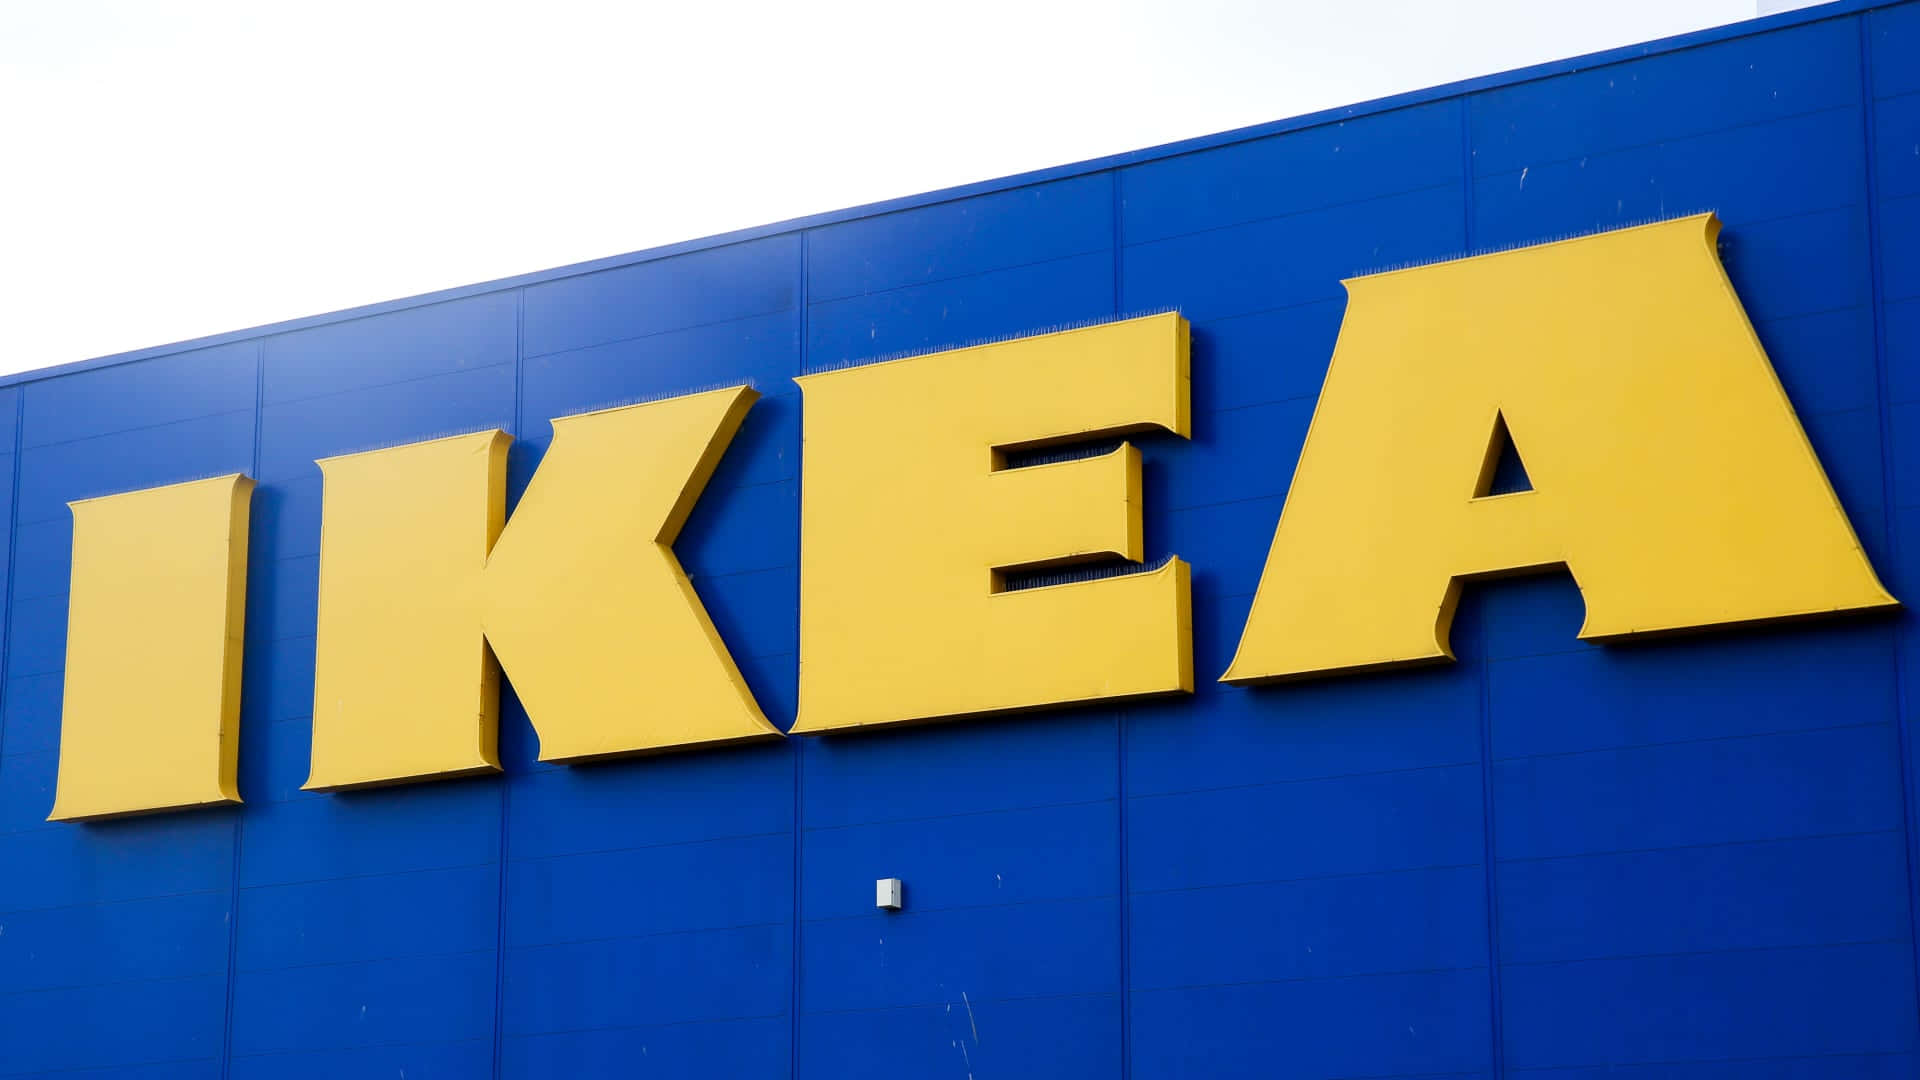 Ikea's New Logo Is Shown On The Side Of A Building